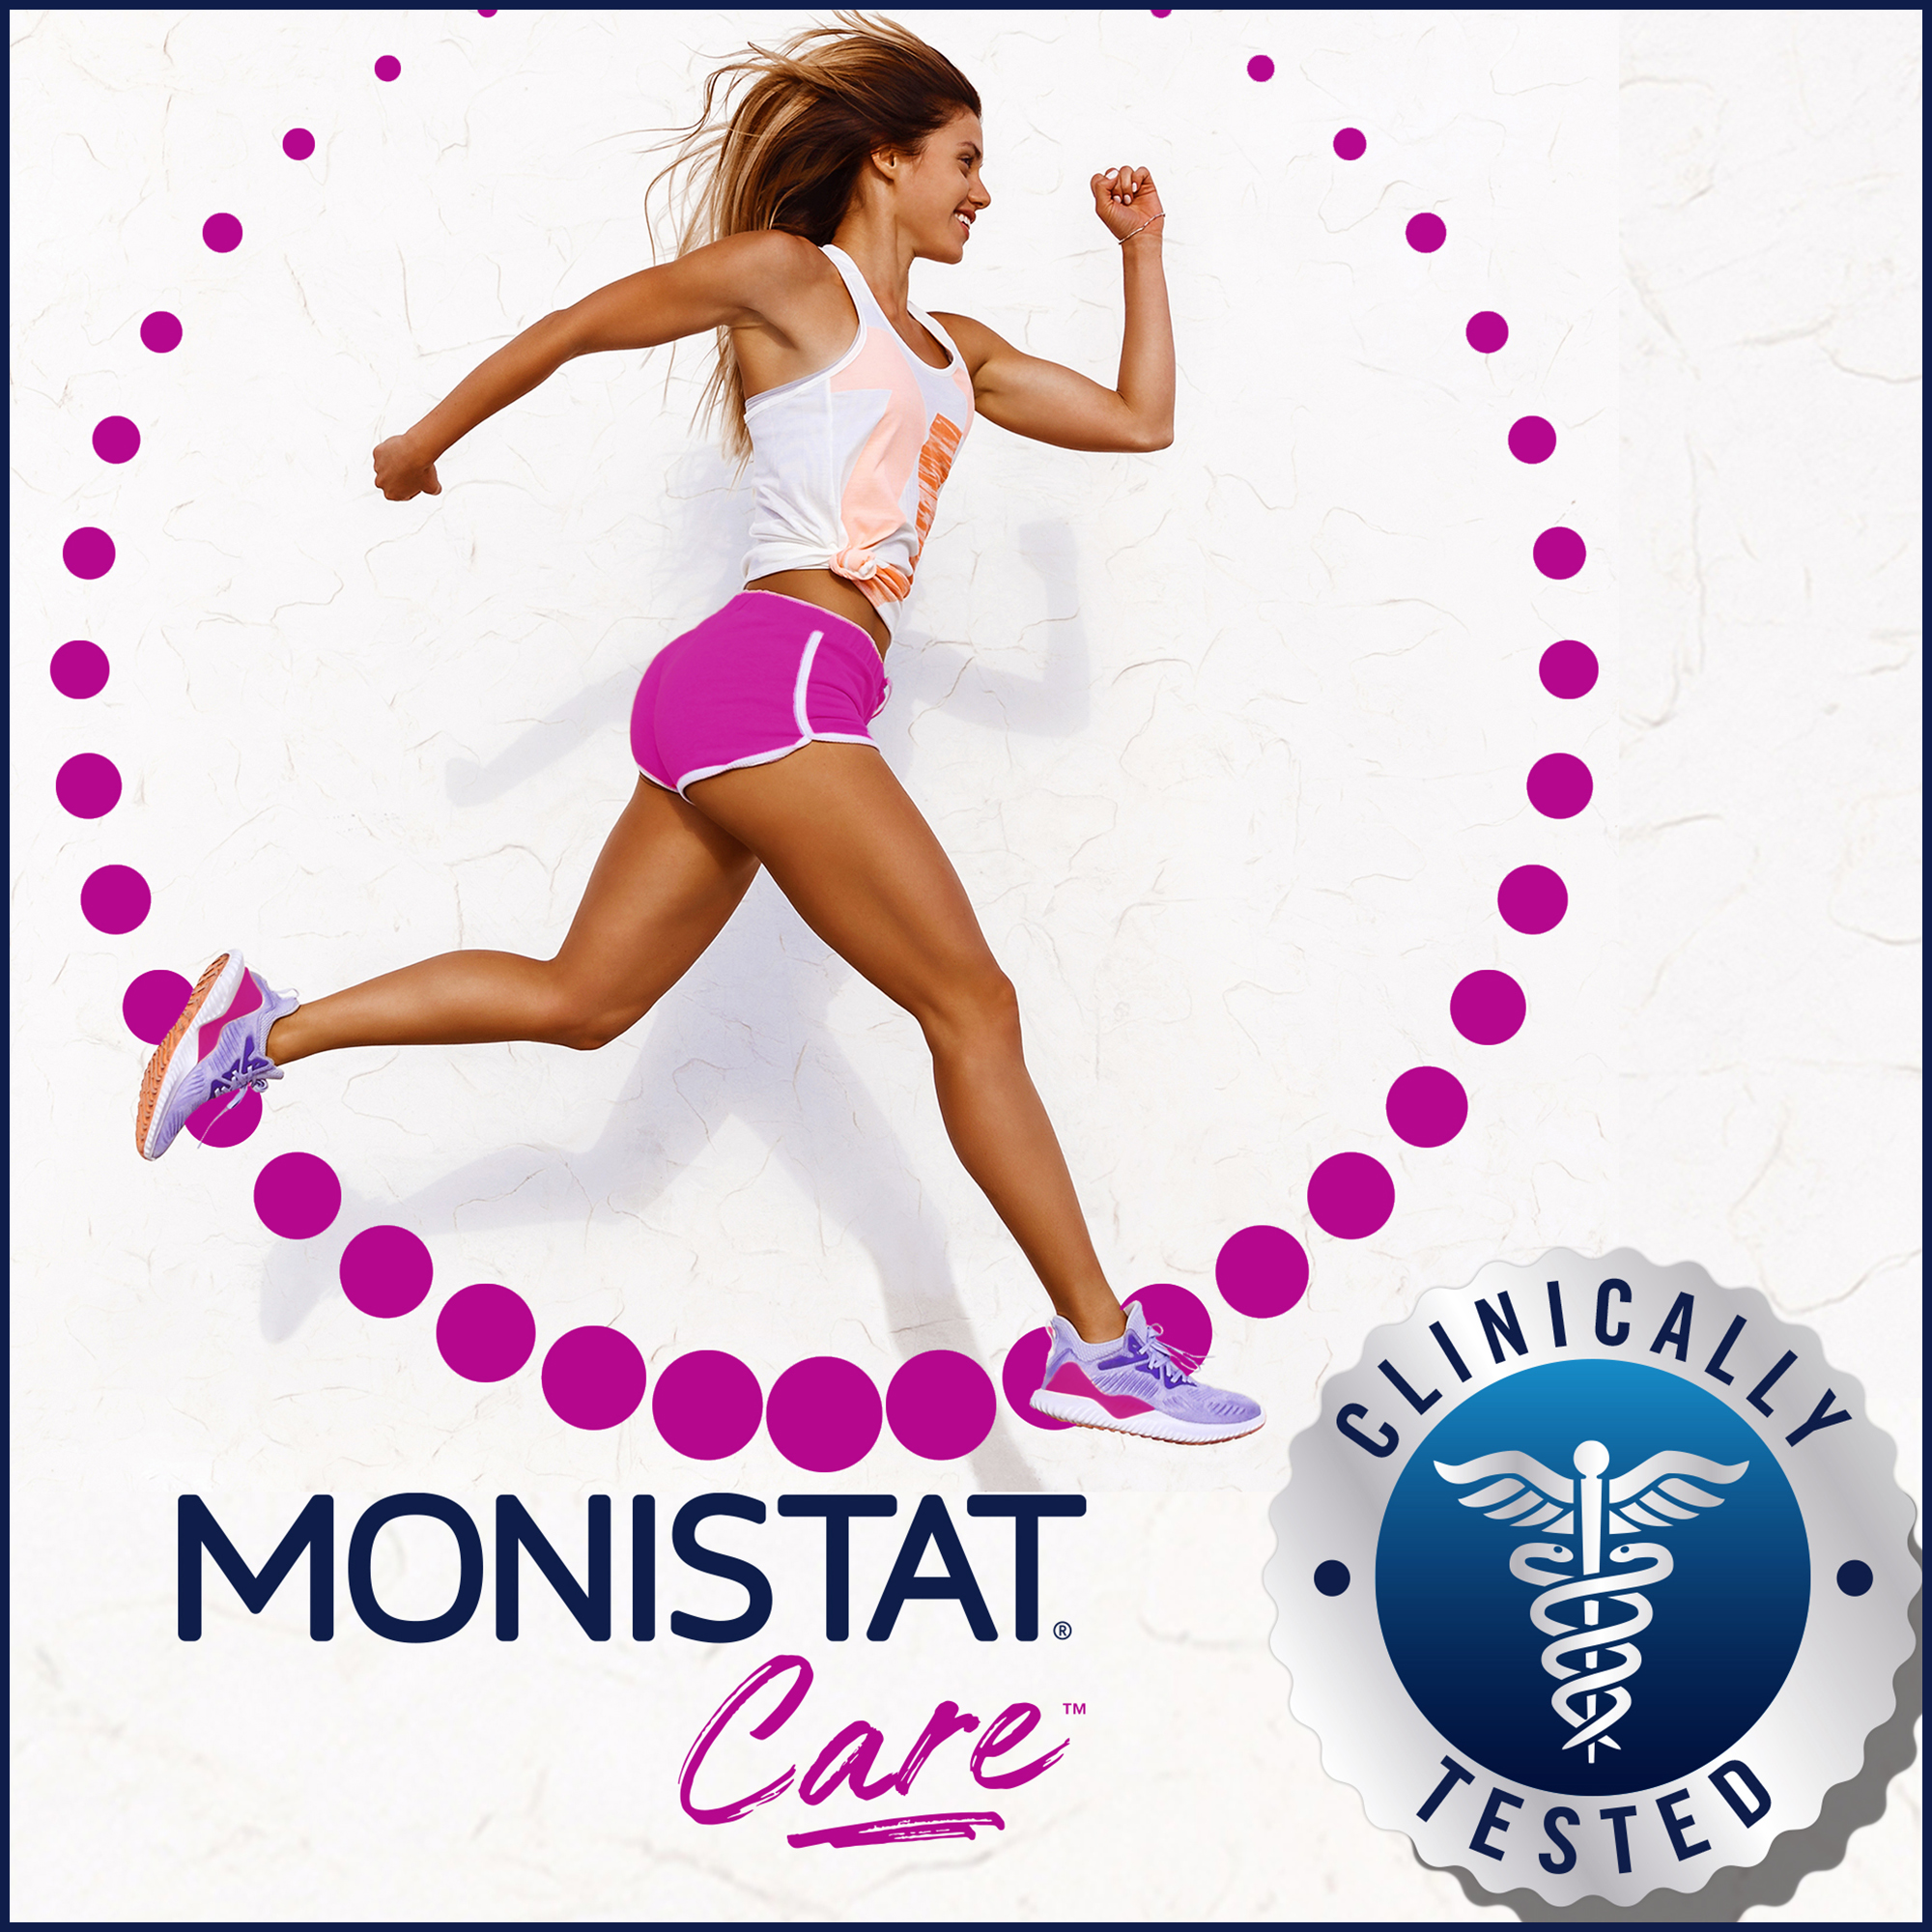 Monistat Chafing Relief Powder Gel, Anti-Chafe Protection, Fragrance Free, 1.5 Oz - image 5 of 13